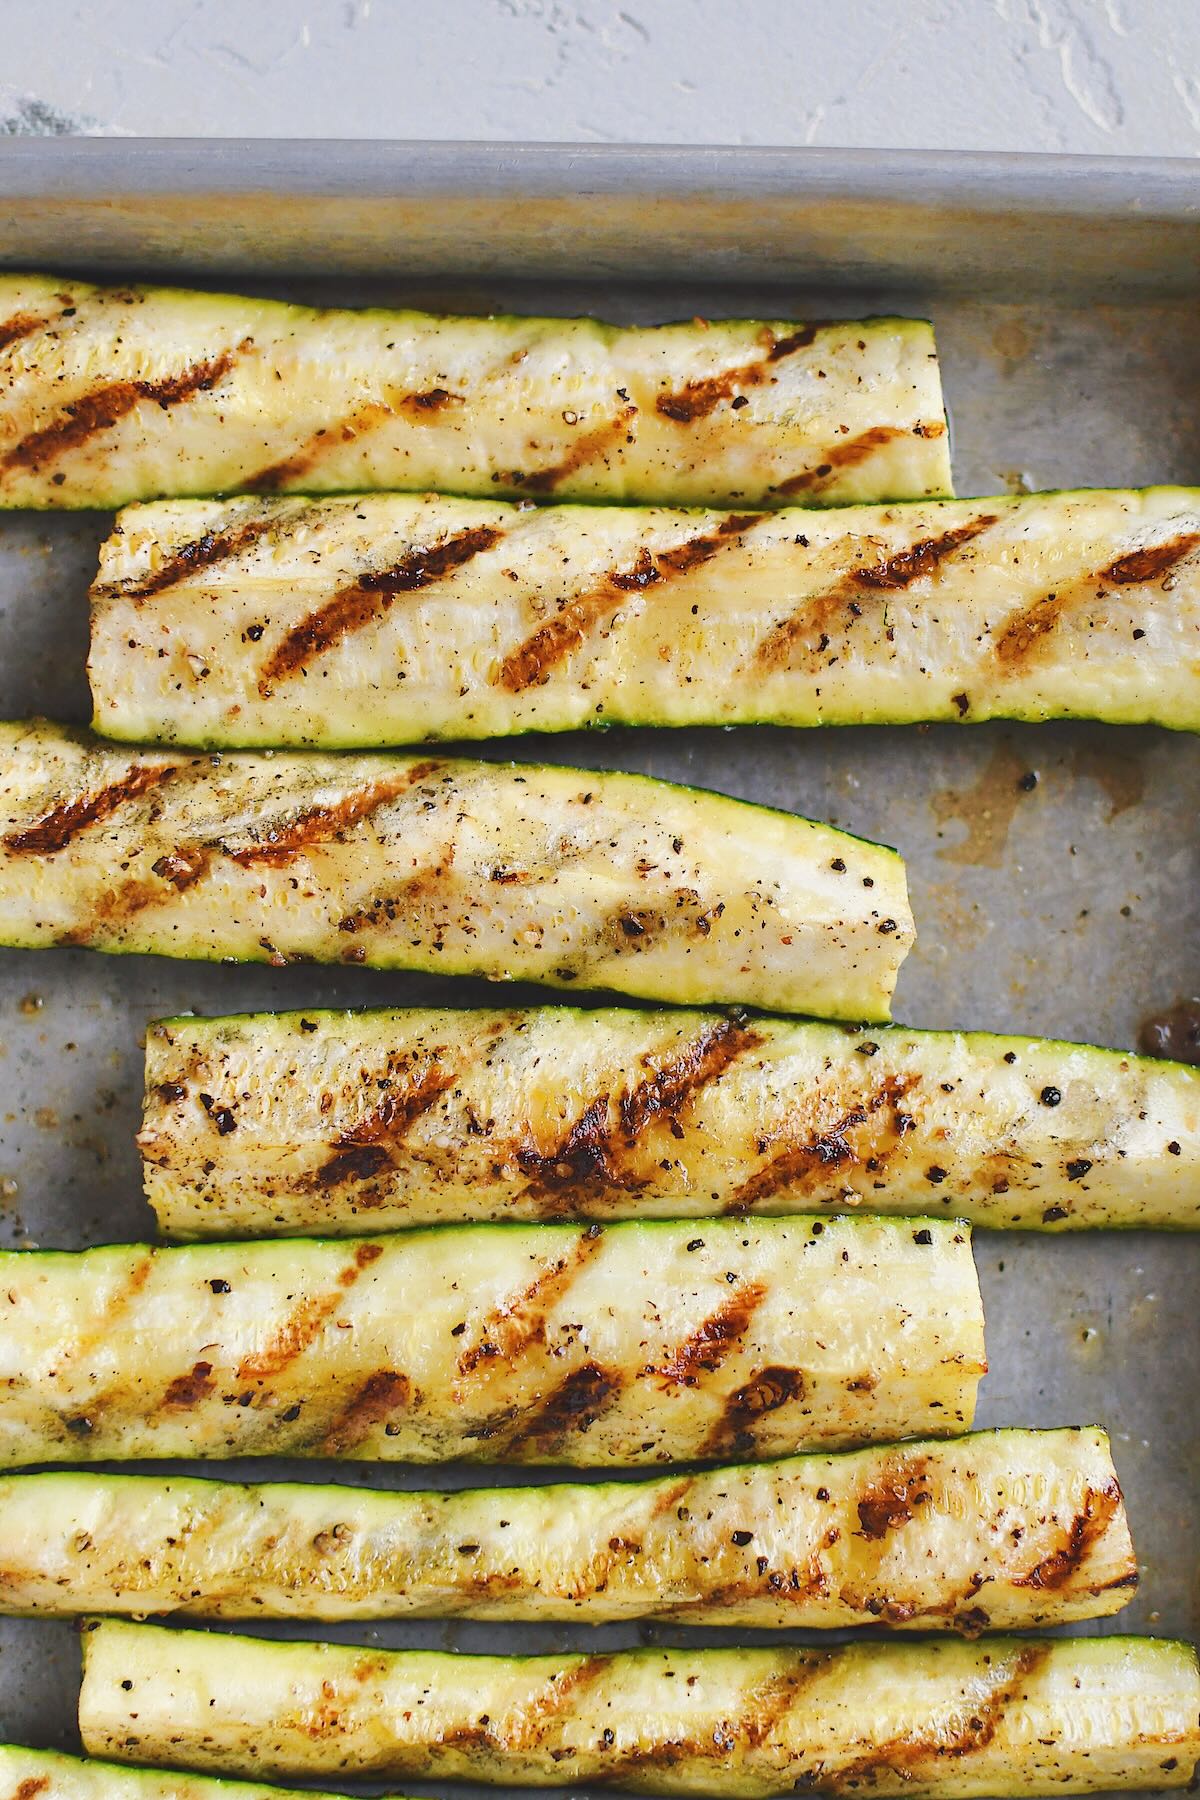 Freshly Grilled Zucchini just off the grill ready to eat.